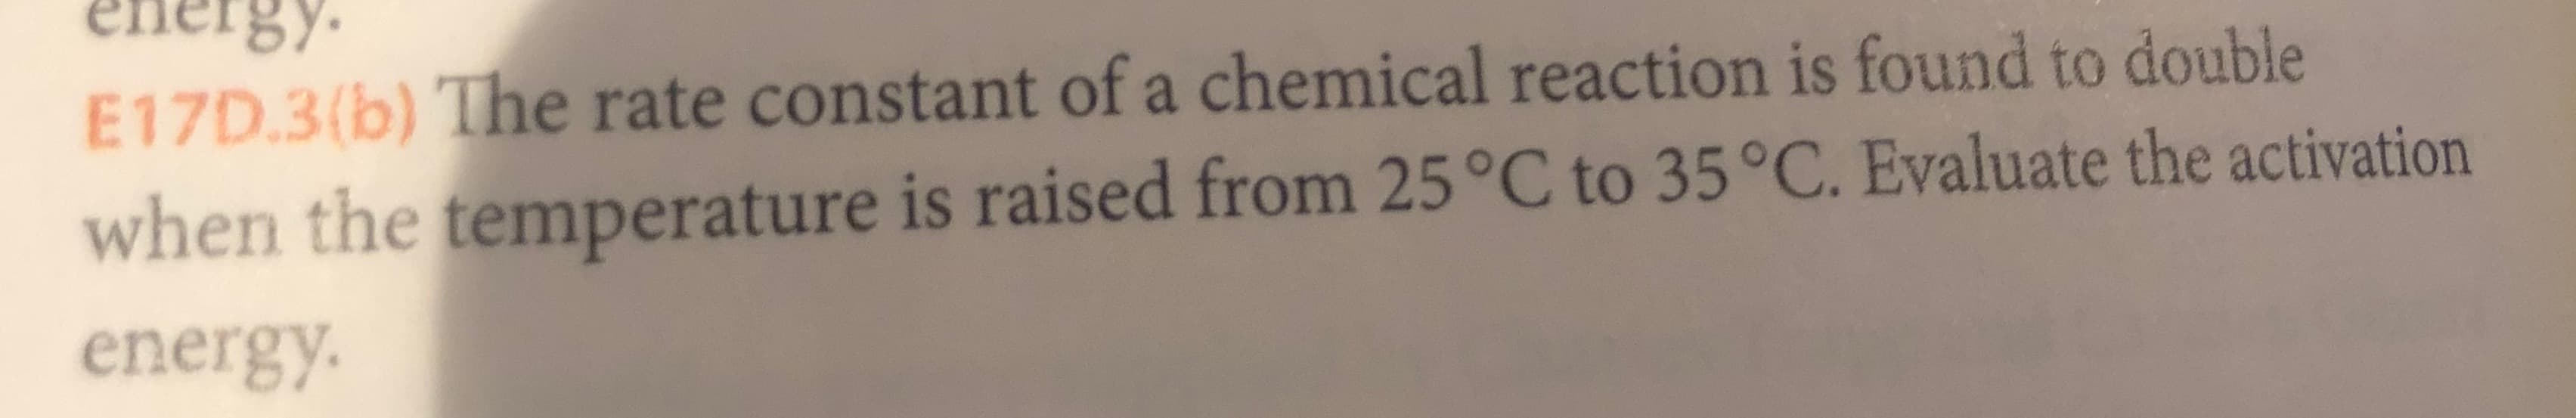 energy
E17D.3(b) The rate constant of a chemical reaction is found to double
when the temperature is raised from 25°C to 35°C. Evaluate the activation
energy
